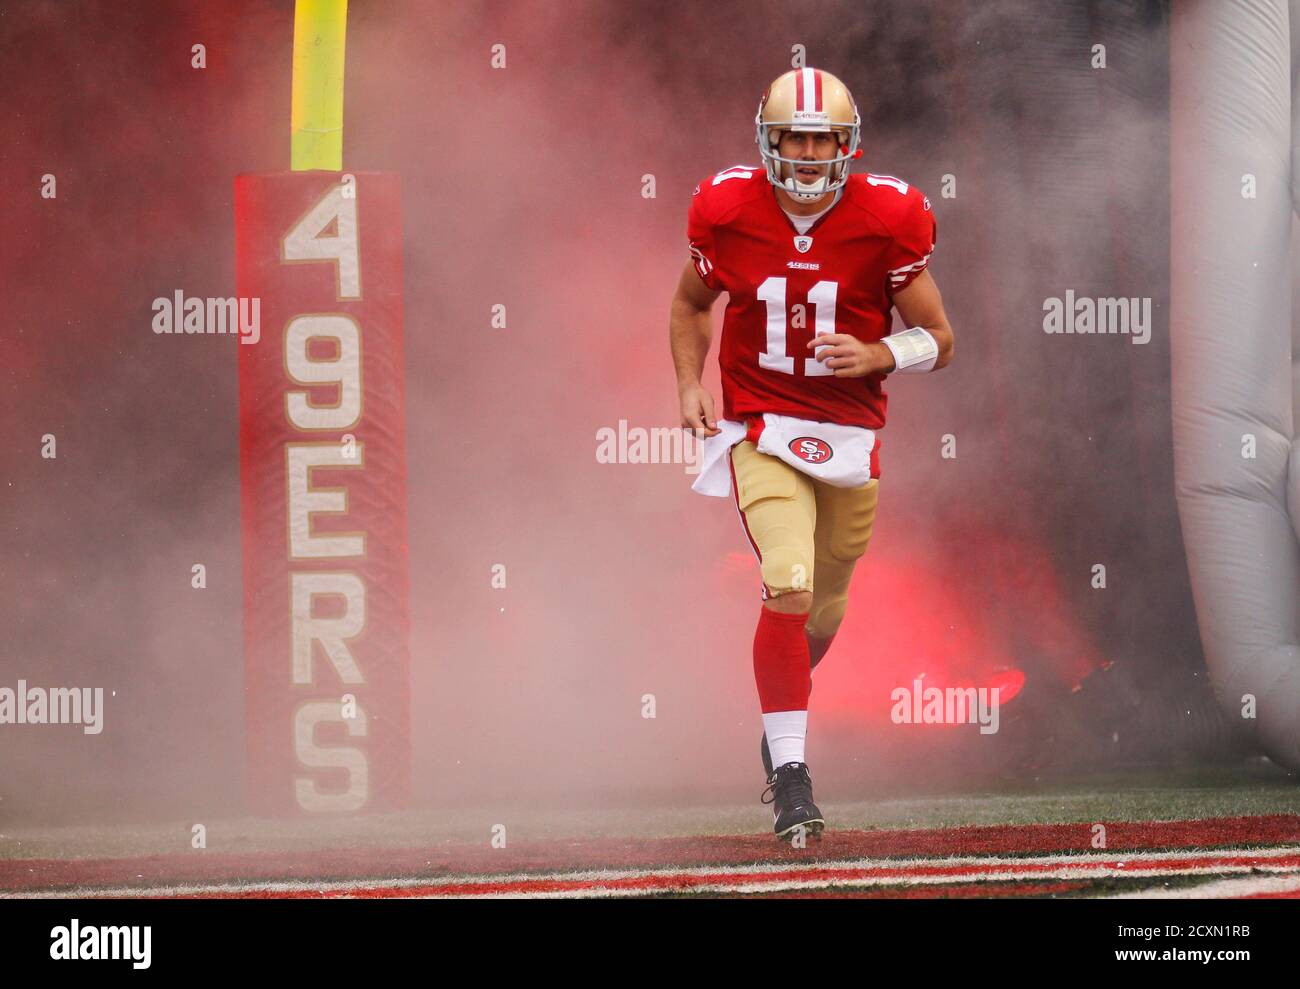 San Francisco 49ers quarterback Alex Smith runs onto the field before the NFL NFC Championship game against the New York Giants in San Francisco, California, January 22, 2012. REUTERS/Mike Blake (UNITED STATES  - Tags: SPORT FOOTBALL) Stock Photo